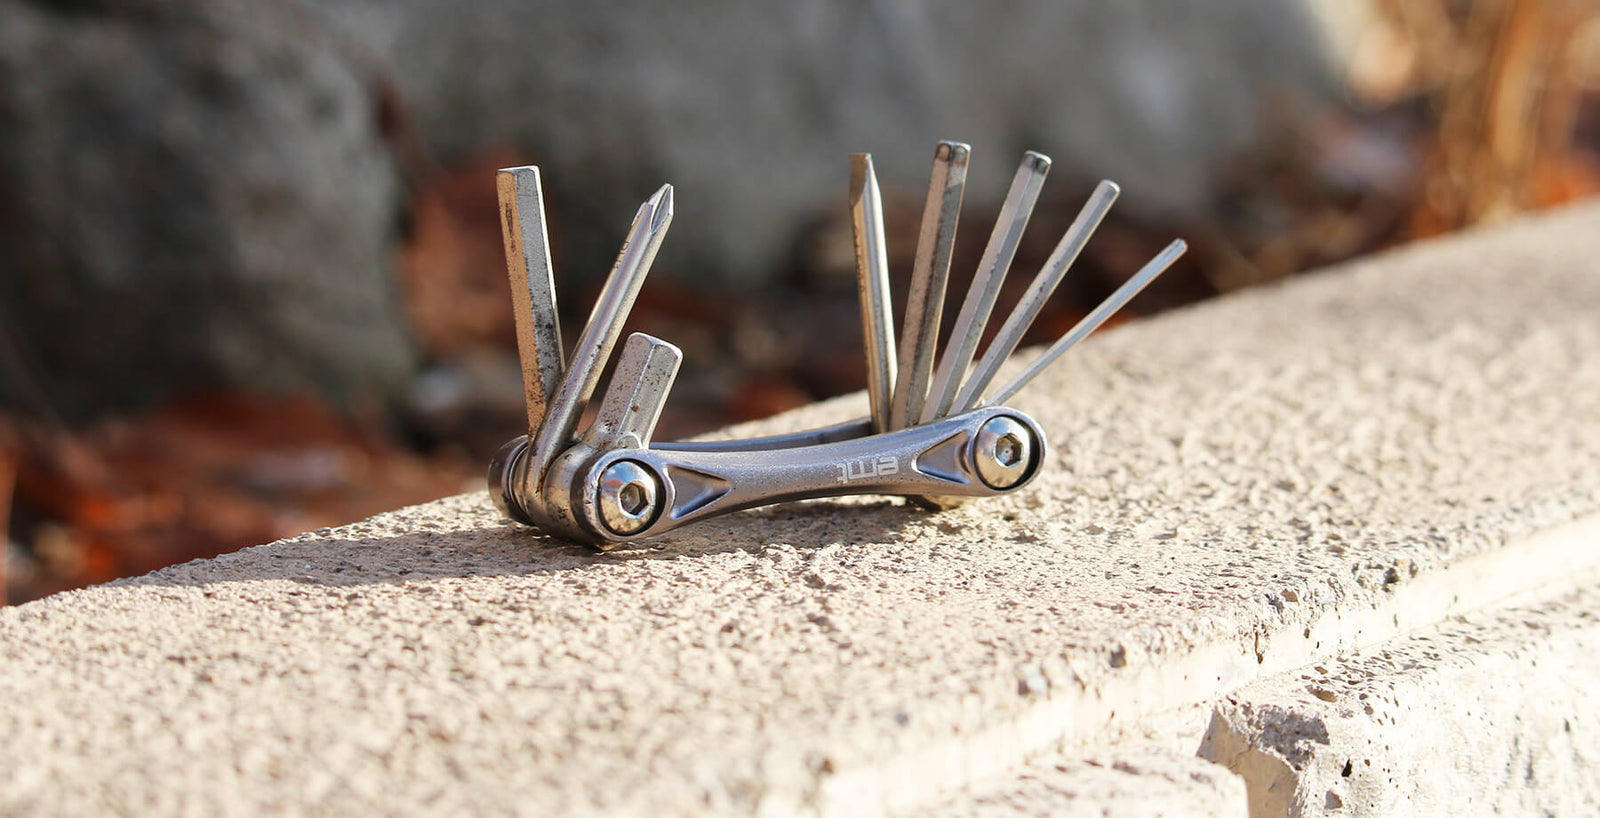 An Ode to the Multitool